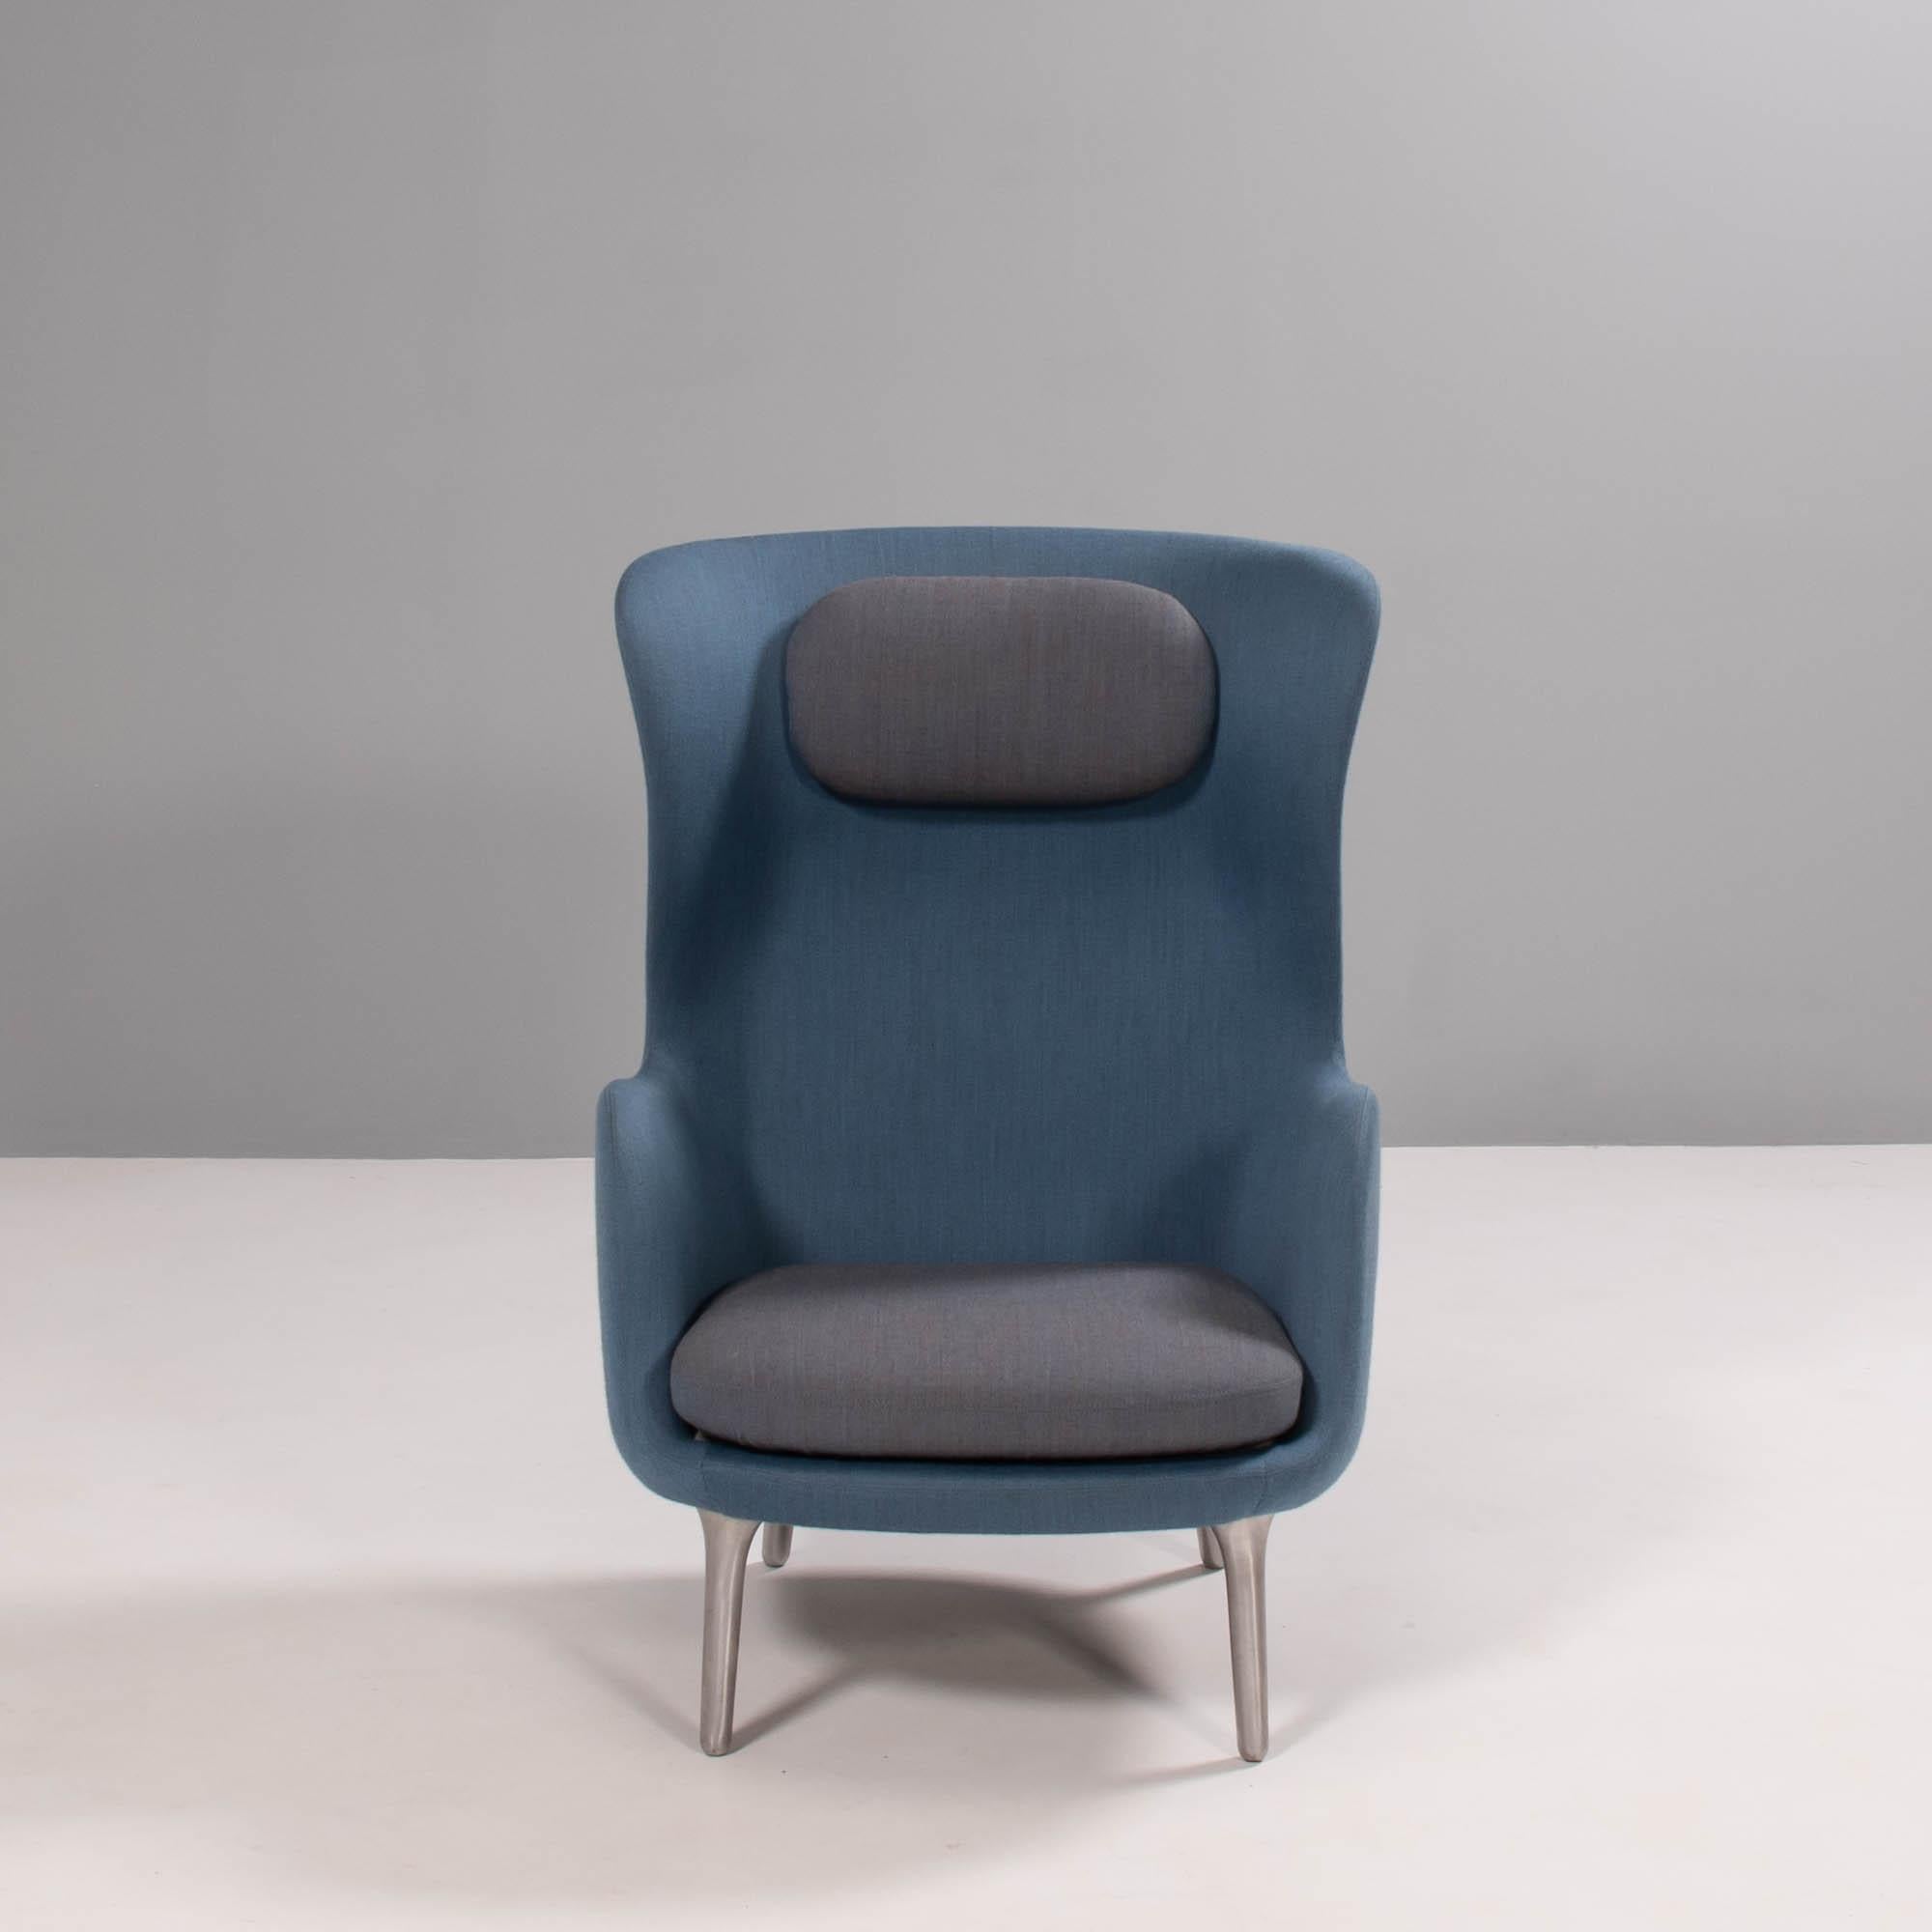 Designed by Jaime Hayon for Fritz Hansen, the RO lounge armchair is named after the Danish word for ‘tranquillity’.

The soft curves of the chair combined with the high backrest creates a cocoon like environment.

The shell of the chair is